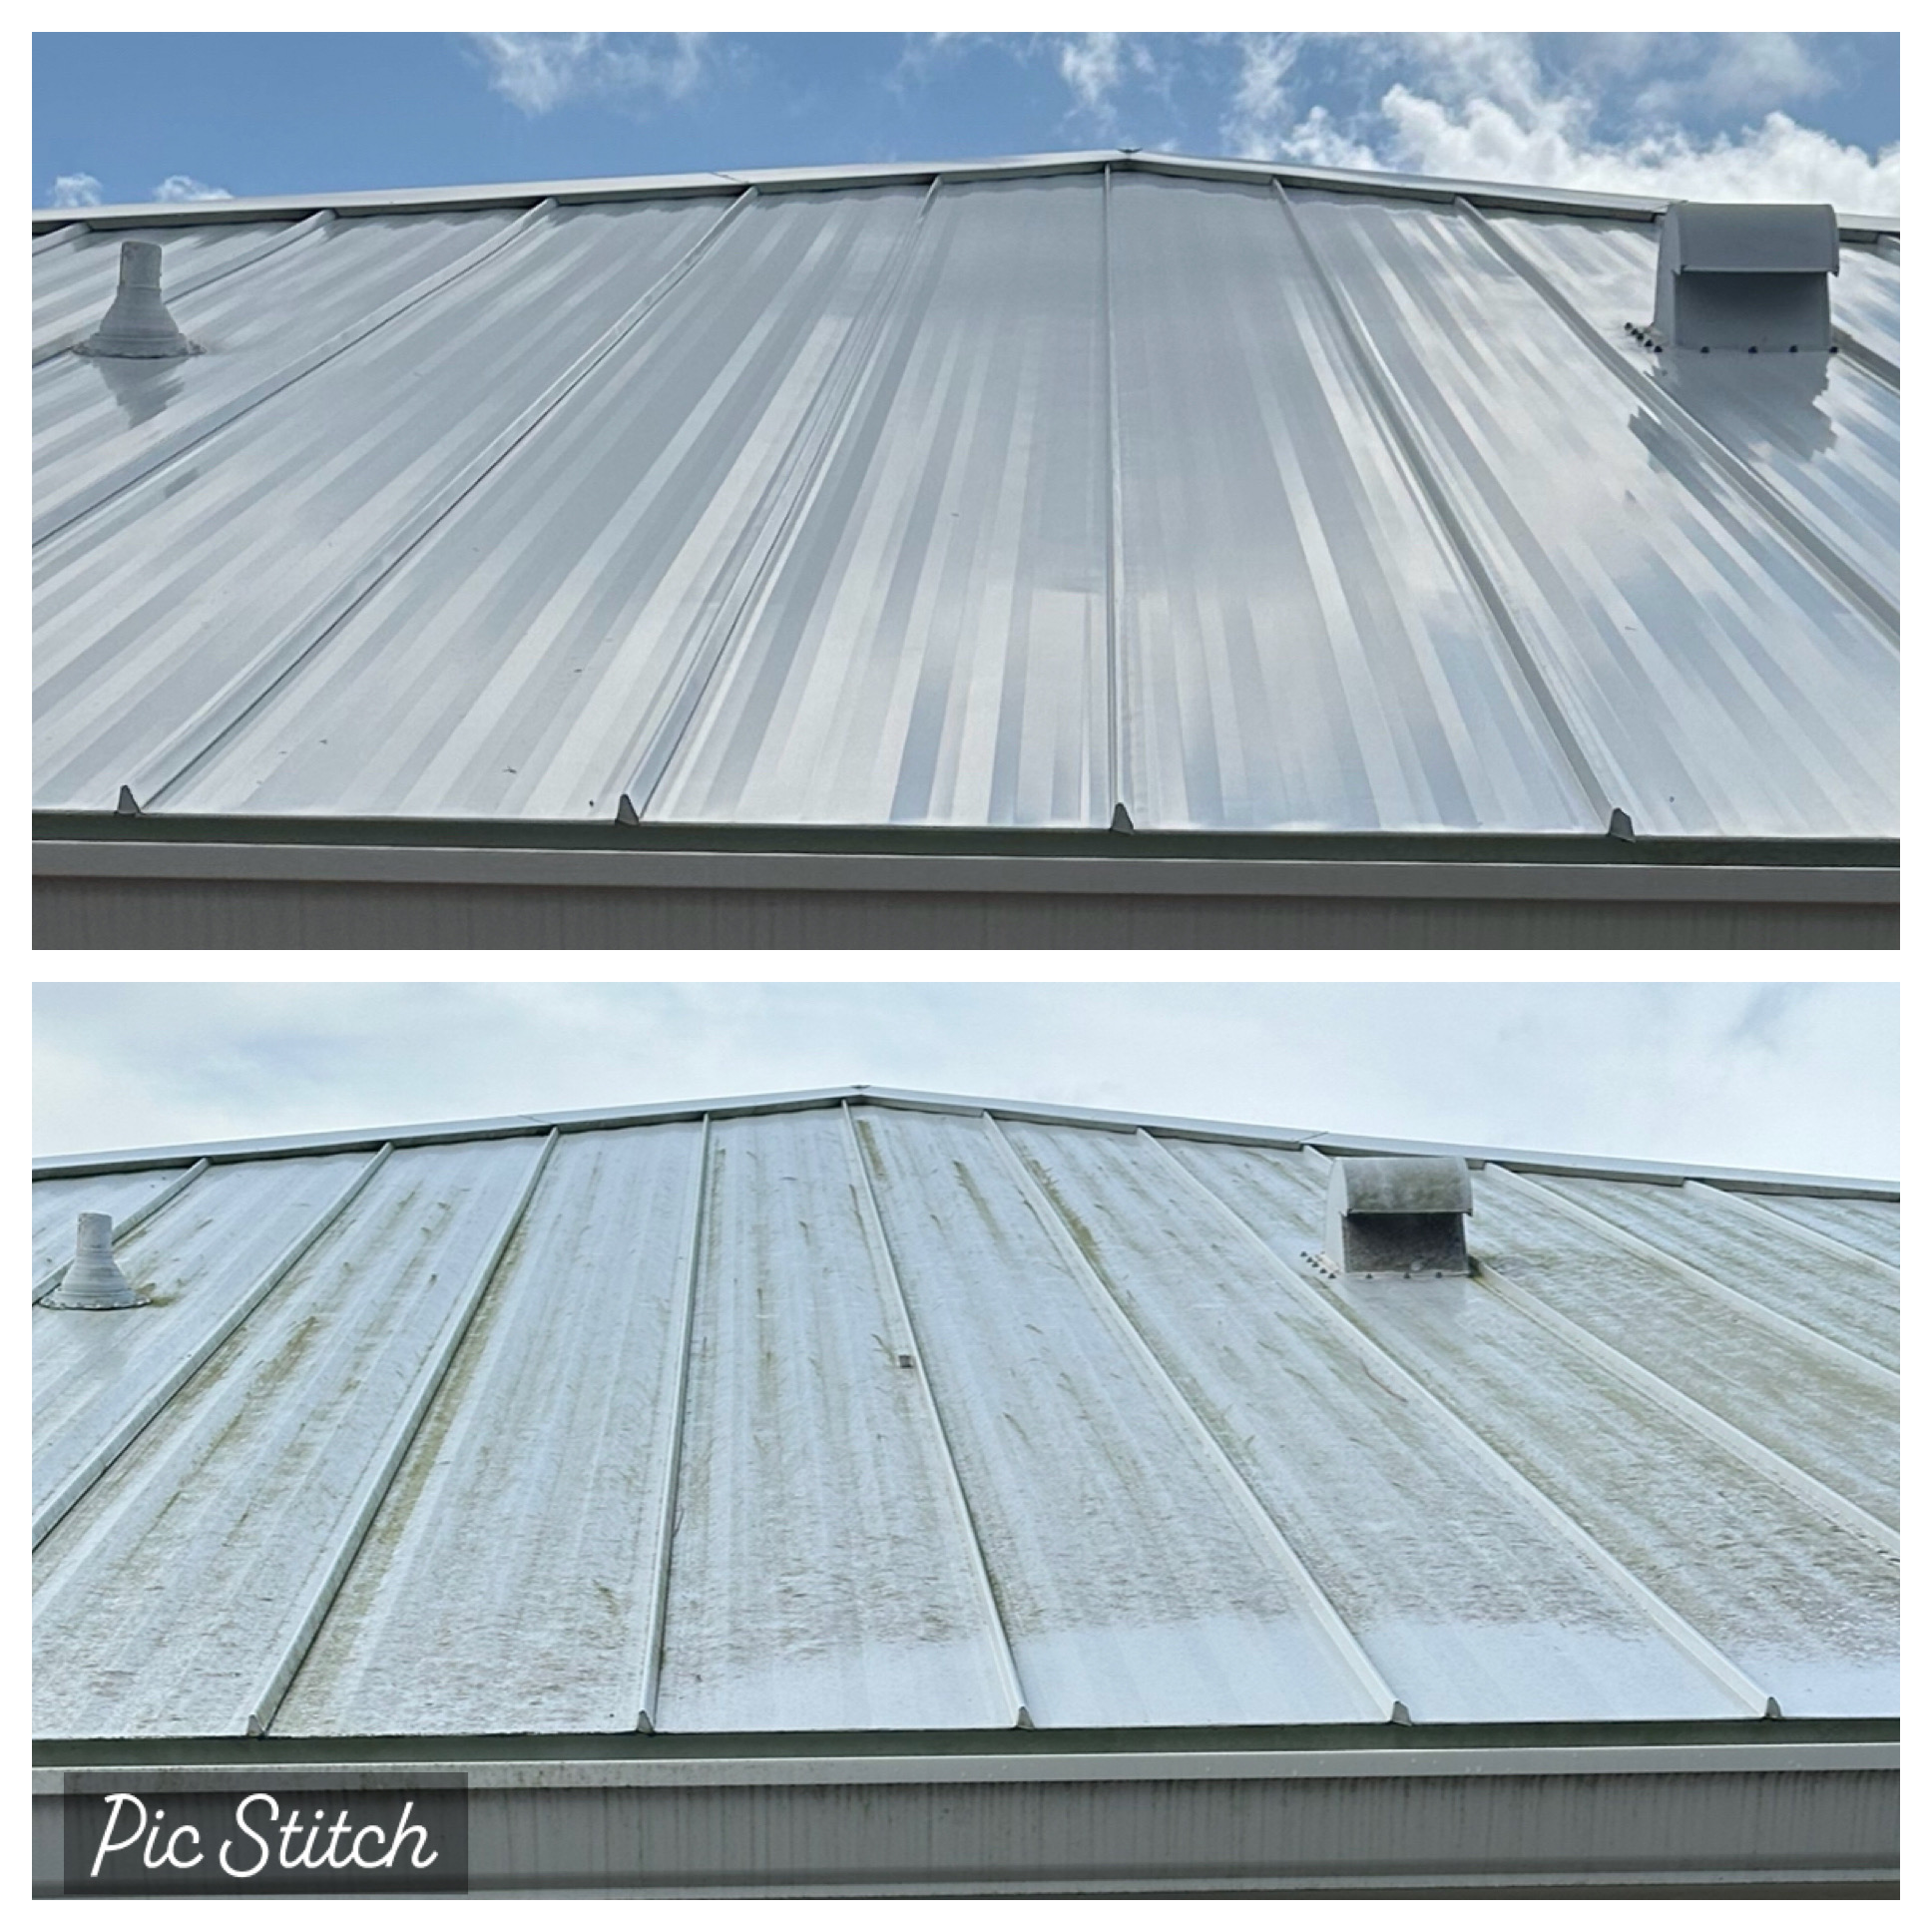 Exquisite metal roof soft wash executed in Stuart, Florida